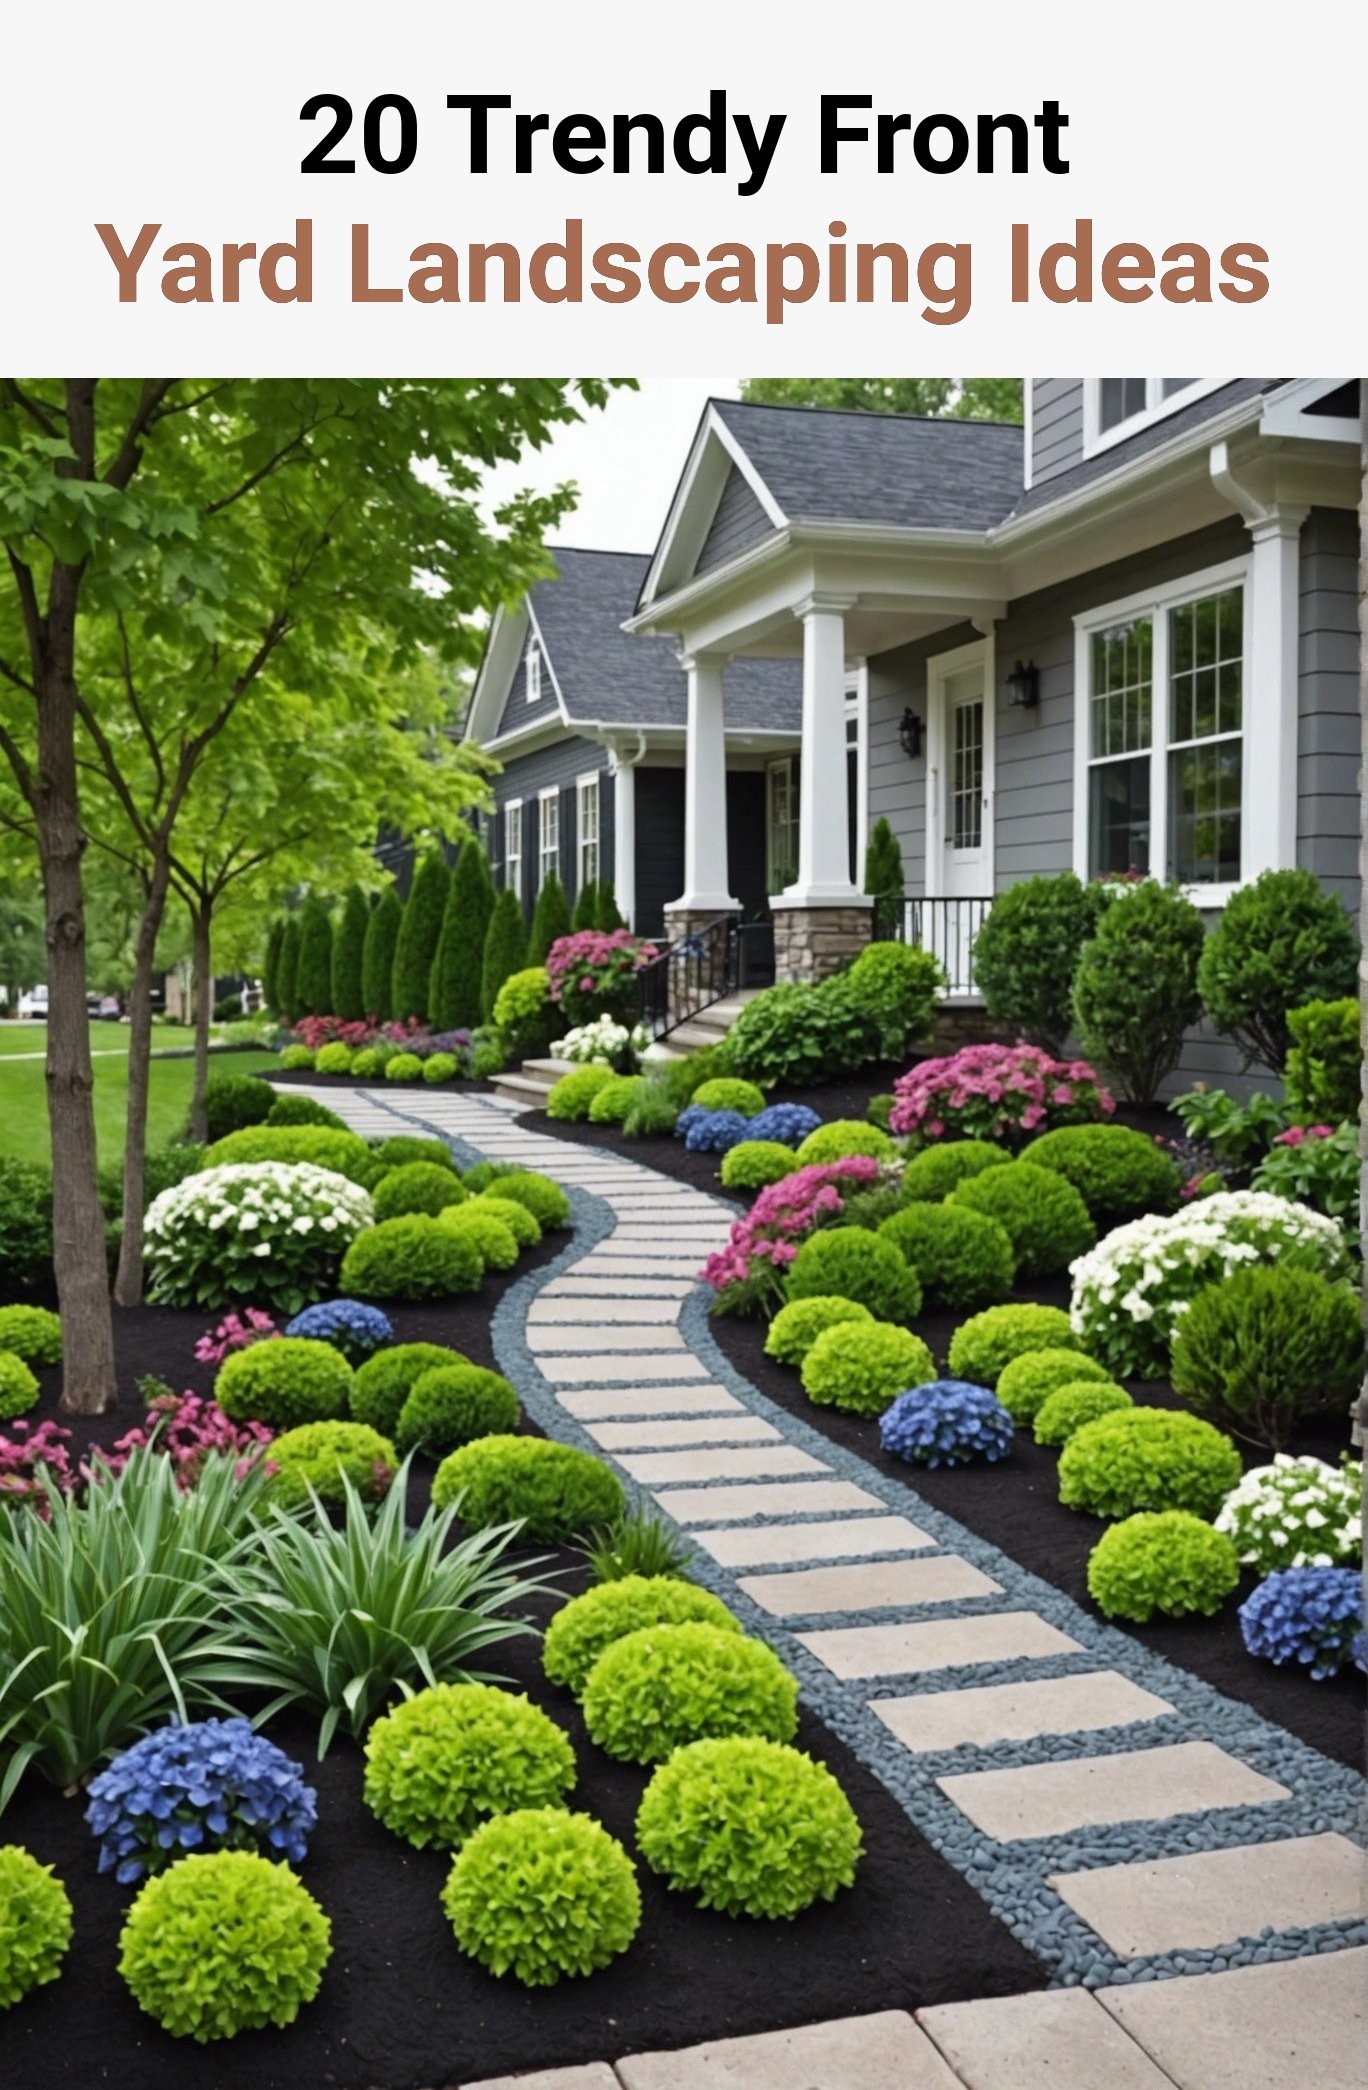 20 Trendy Front Yard Landscaping Ideas